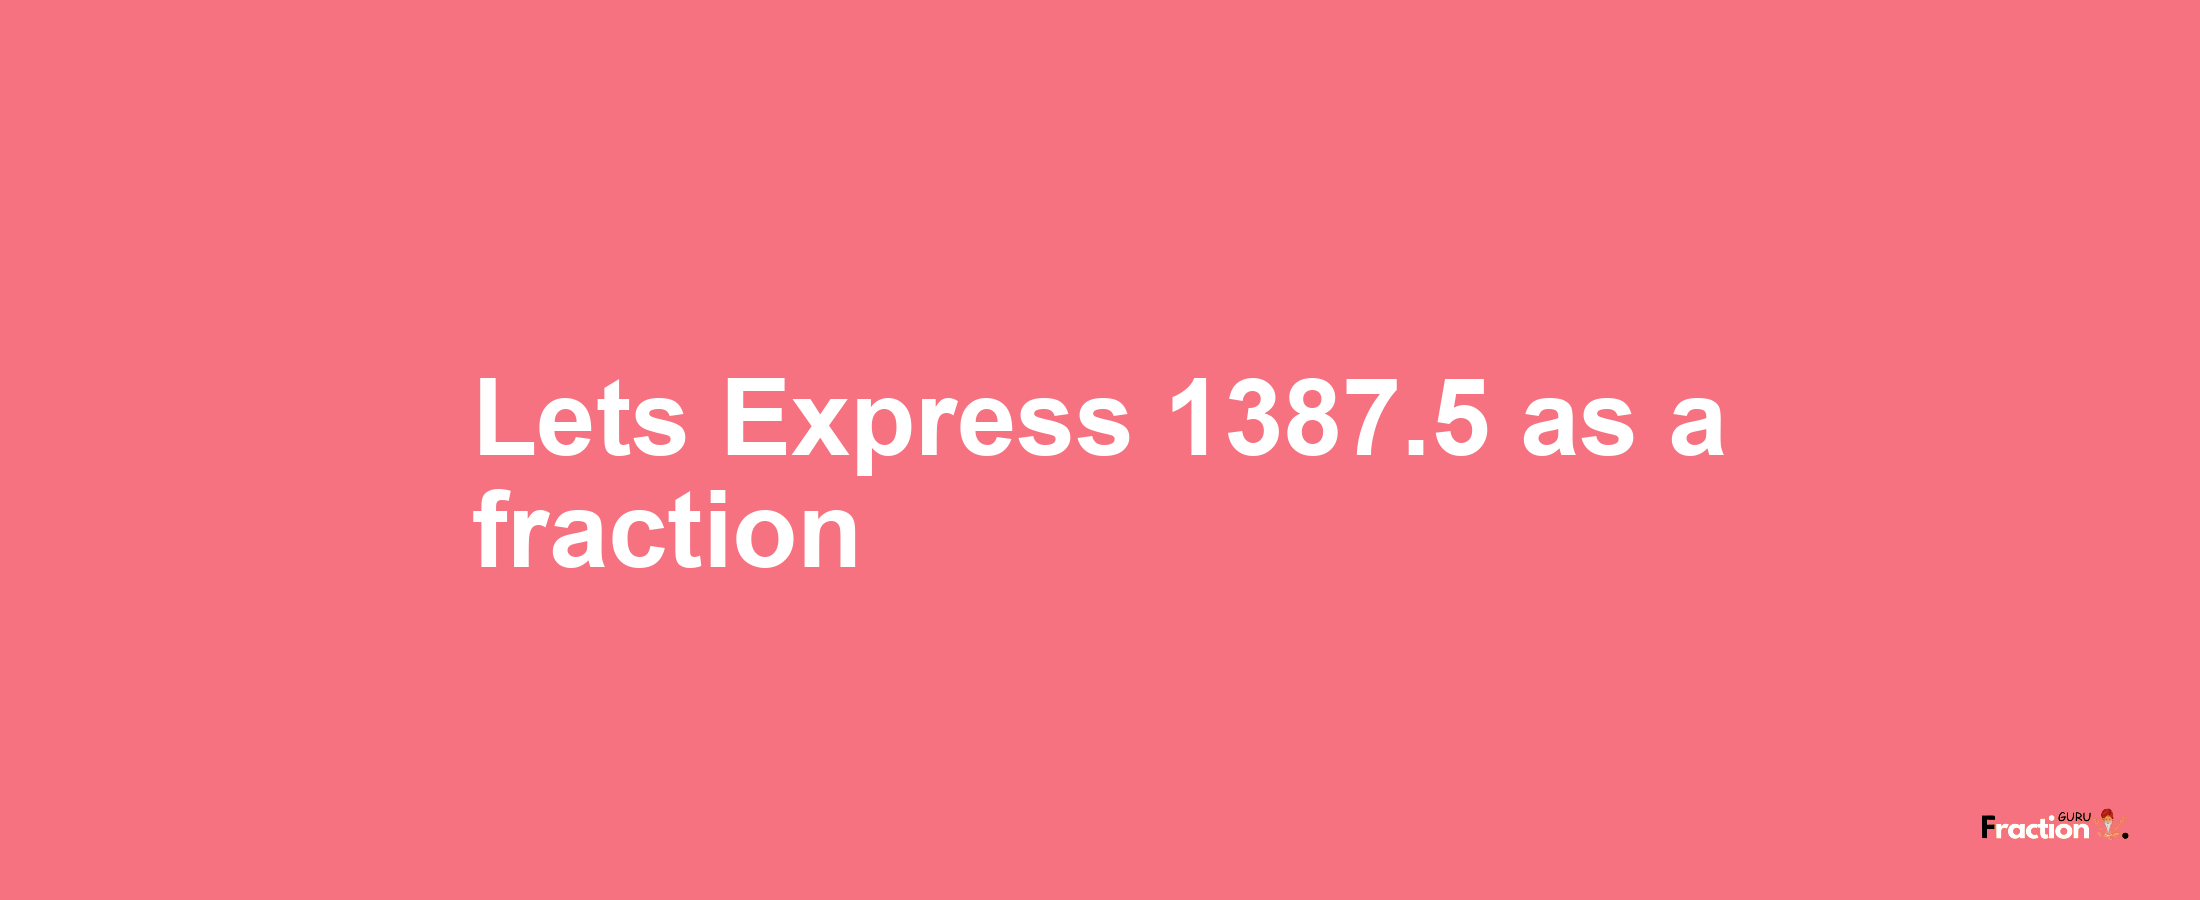 Lets Express 1387.5 as afraction